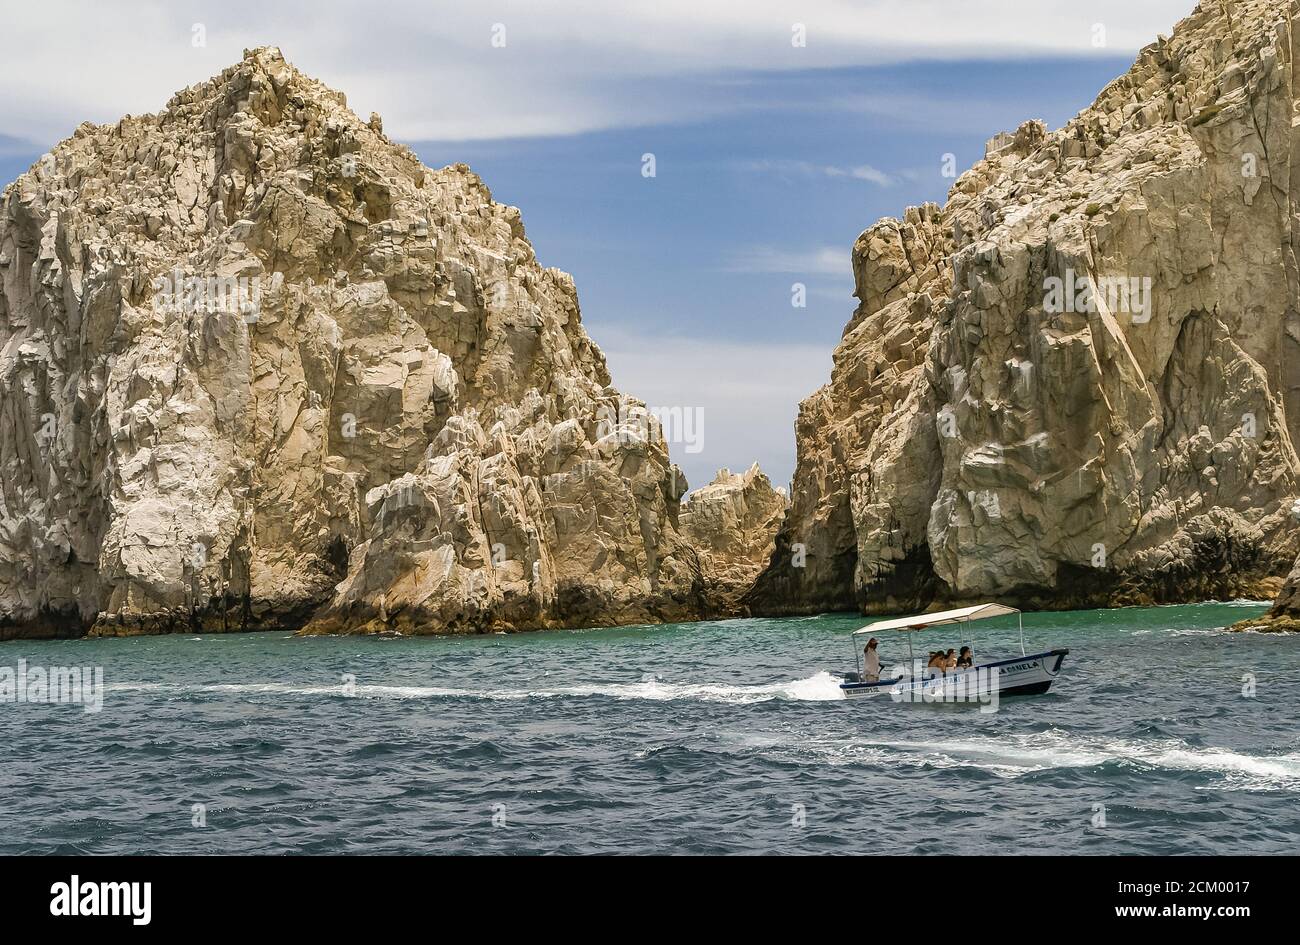 Cabo San Lucas, Mexico - April 22, 2008: South end of Baha California. Closeup of couple of beige rocks in a gray-greenish ocean under blue cloudscape Stock Photo